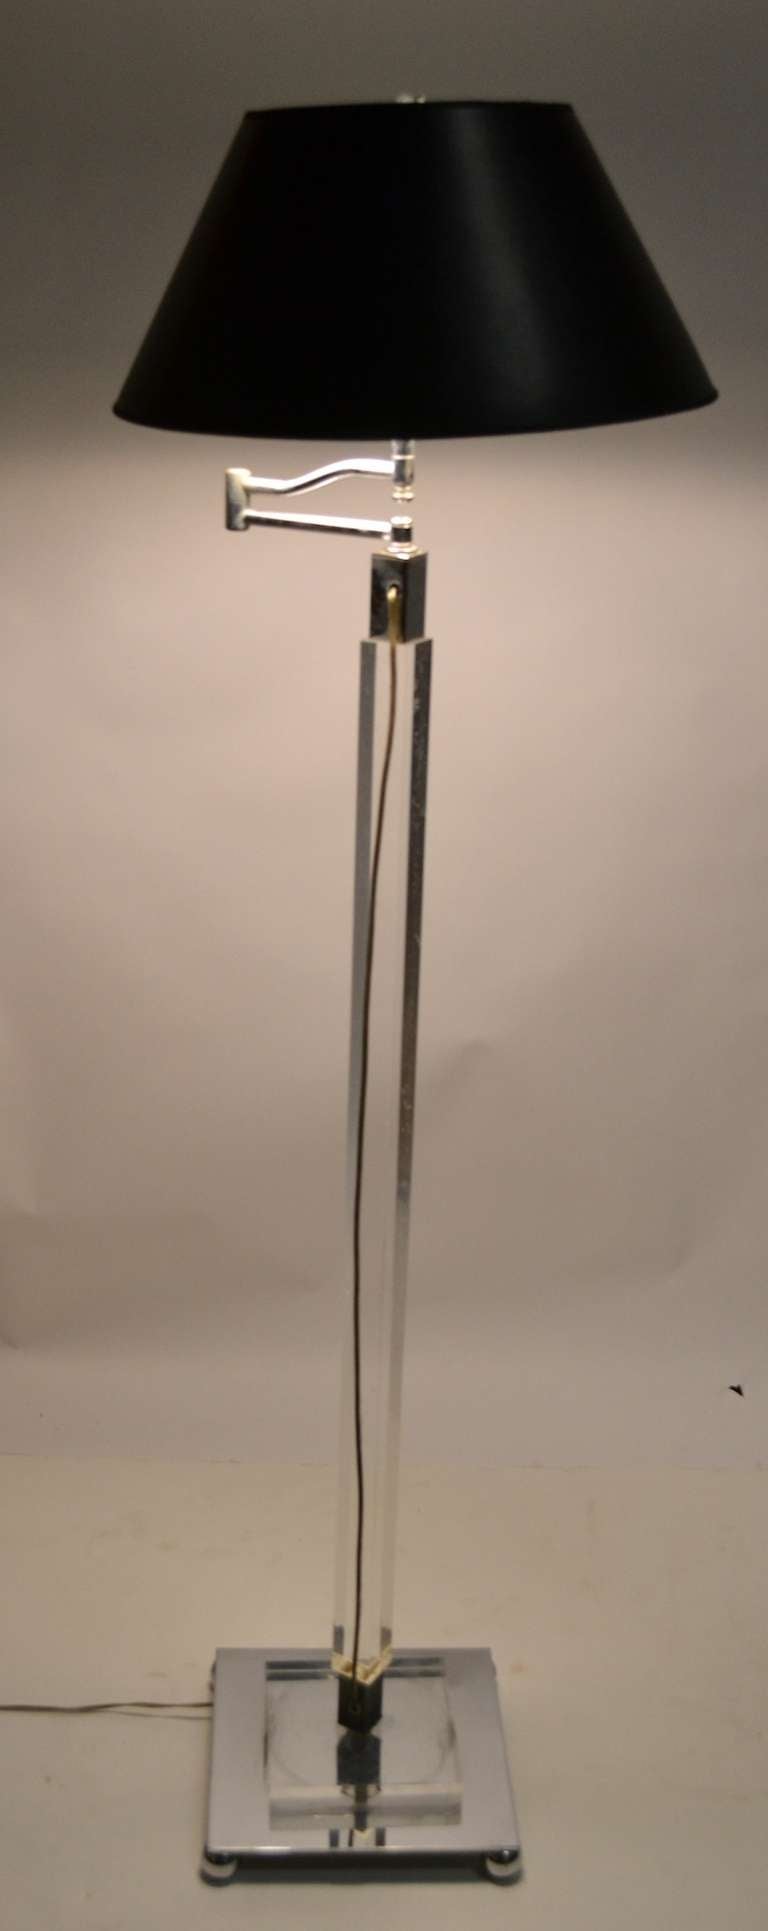 Art Deco period swing arm chrome and lucite floor lamp. Squared vertical standard, chrome ball feet, base, and fitments. The adjustable top makes this a perfect reading lamp.